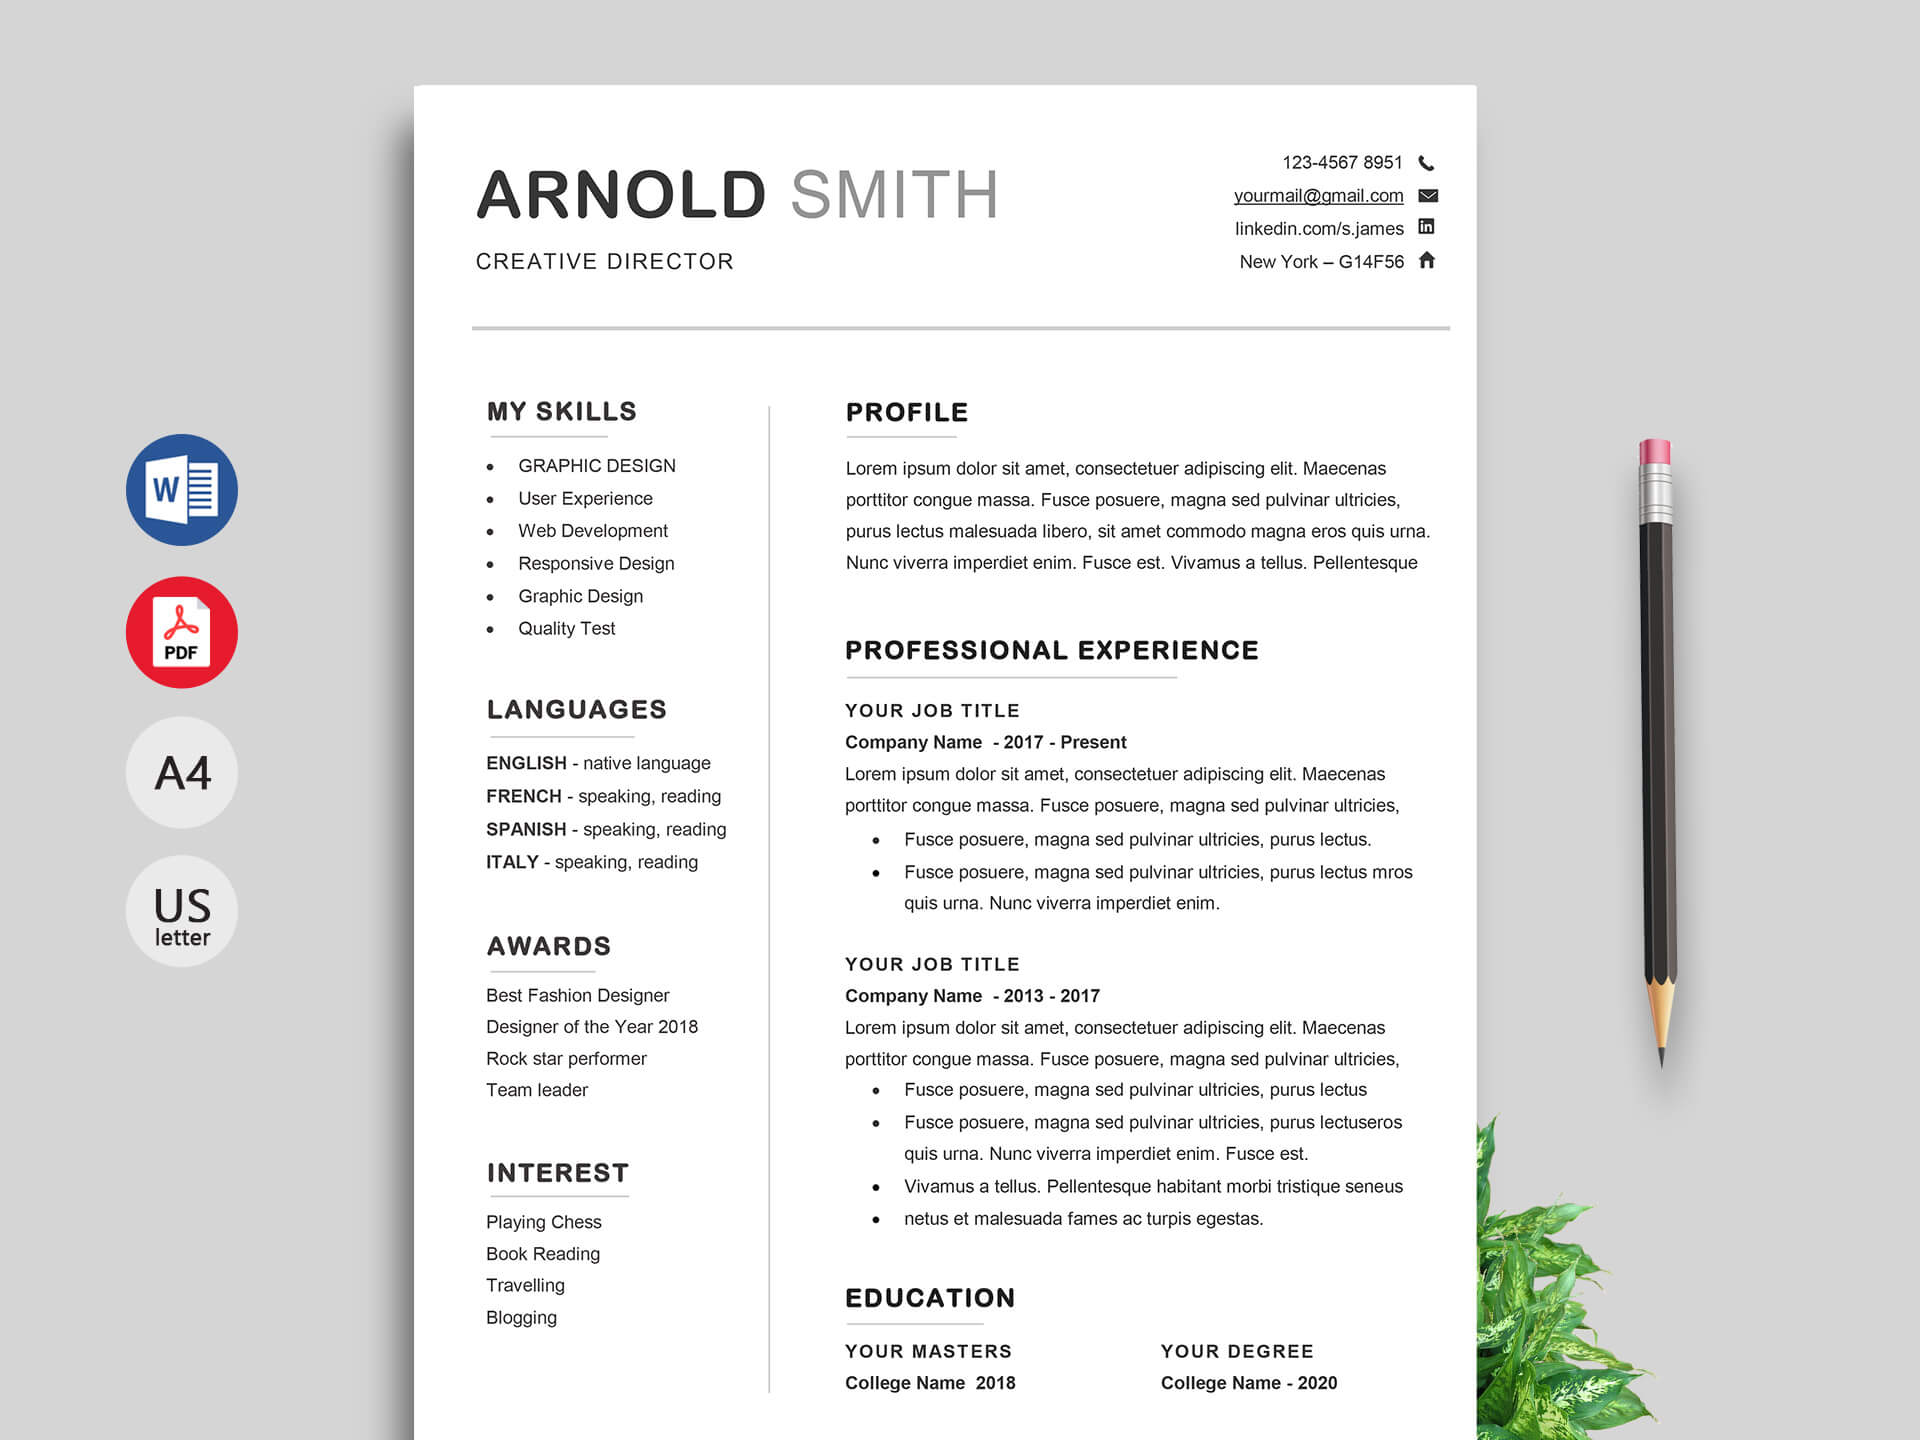 Resume ~ Resume Templates Free Downloads For Microsoft Word For Blank Resume Templates For Microsoft Word